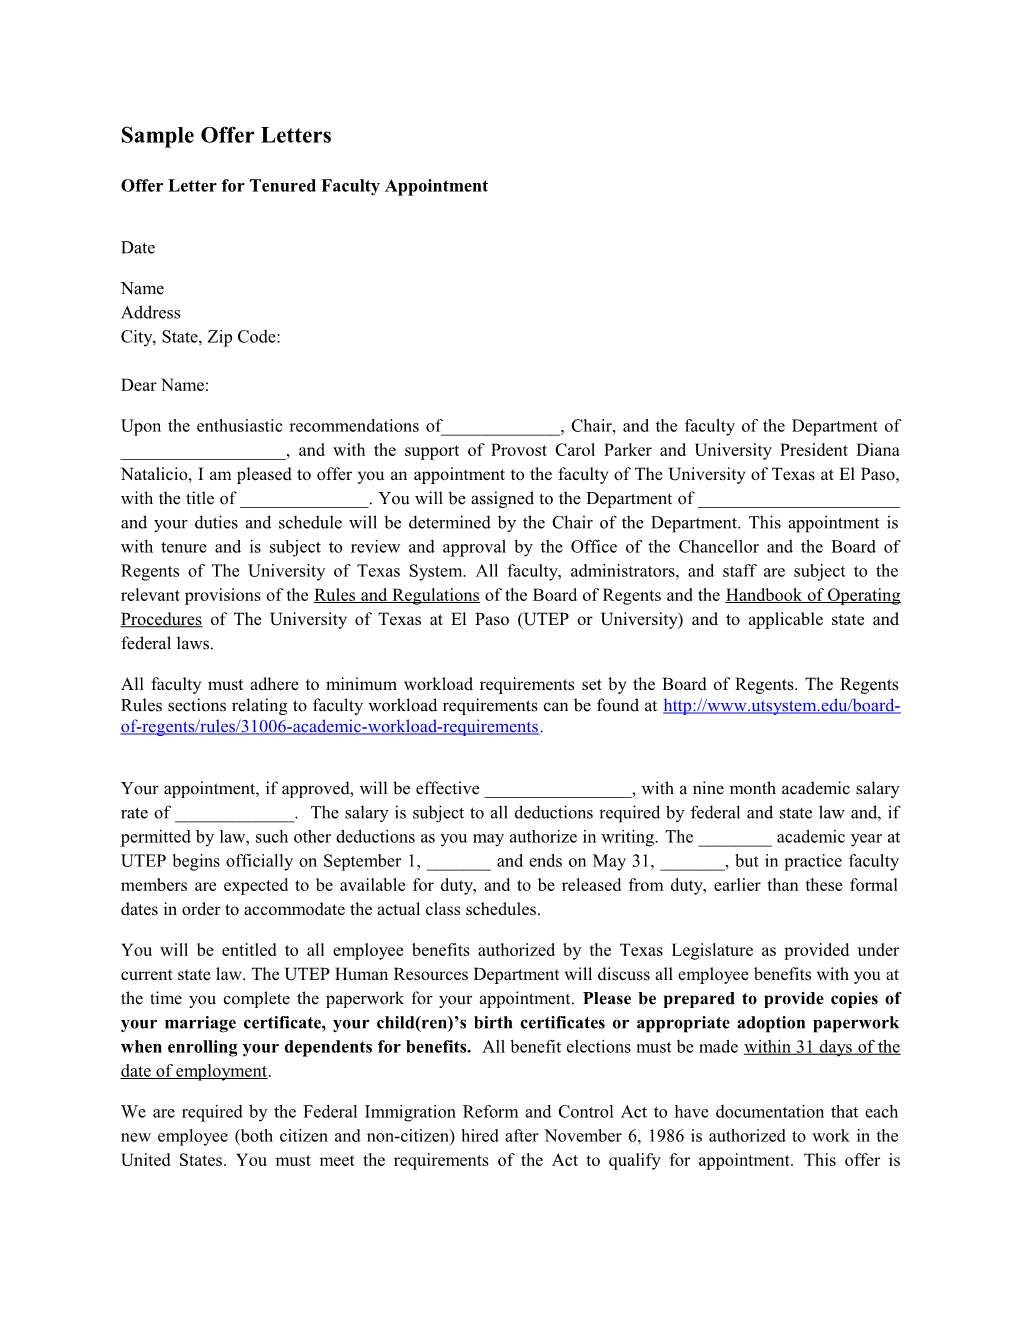 Offer Letter for Tenured Faculty Appointment